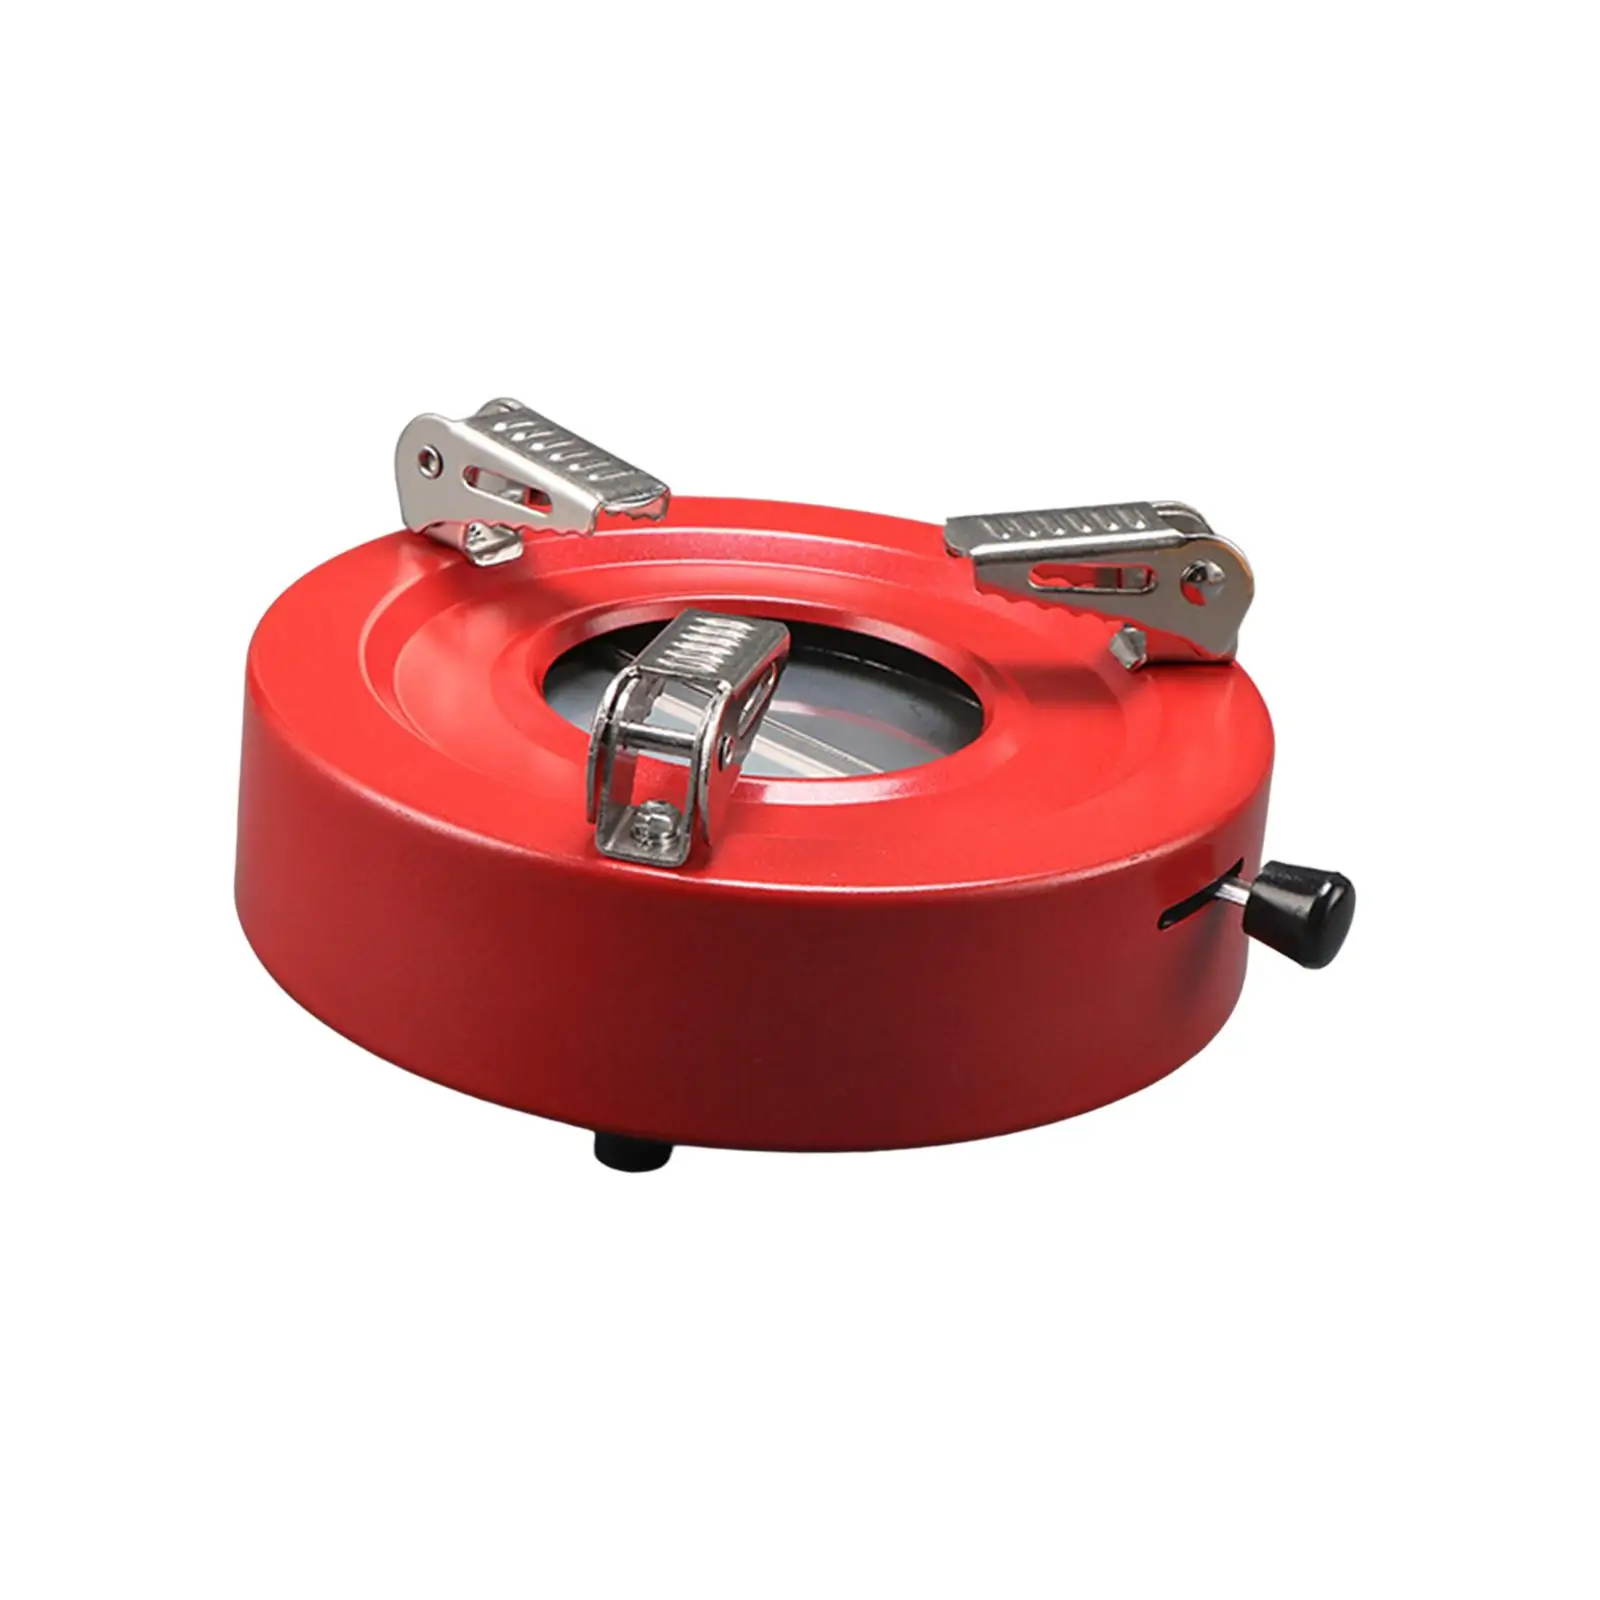 Alcohol Stove Durable Compact Camping Stove for Household Restaurant Outdoor